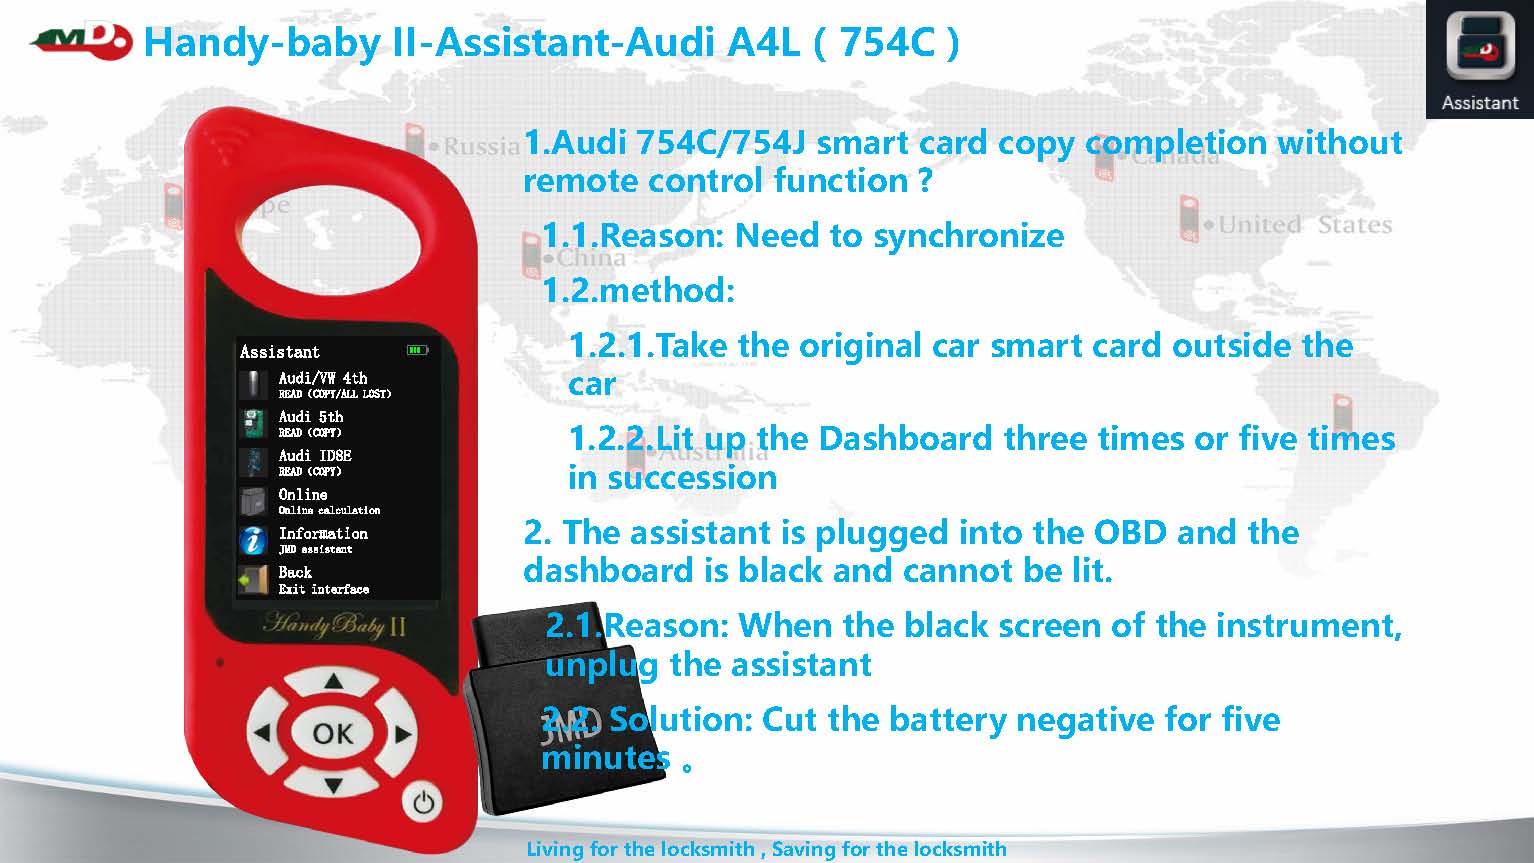 jmd-handy-baby-2-and -jmd-assistant-guide-06